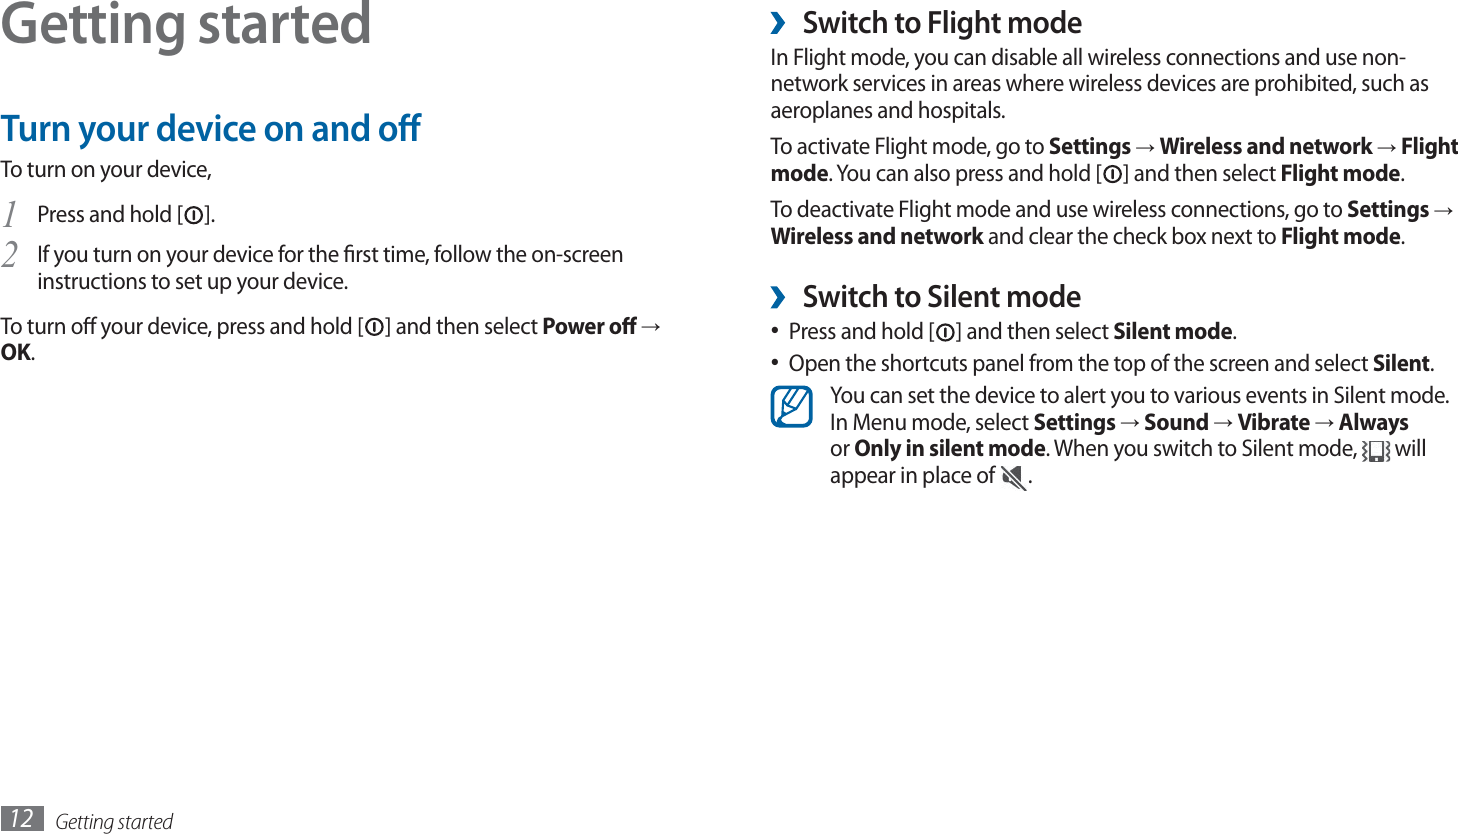 Getting started12Switch to Flight mode ›In Flight mode, you can disable all wireless connections and use non-network services in areas where wireless devices are prohibited, such as aeroplanes and hospitals.To activate Flight mode, go to Settings → Wireless and network → Flight mode. You can also press and hold [ ] and then select Flight mode.To deactivate Flight mode and use wireless connections, go to Settings → Wireless and network and clear the check box next to Flight mode.Switch to Silent mode ›Press and hold [•  ] and then select Silent mode.Open the shortcuts panel from the top of the screen and select •  Silent.You can set the device to alert you to various events in Silent mode. In Menu mode, select Settings → Sound → Vibrate → Always or Only in silent mode. When you switch to Silent mode,   will appear in place of  .Getting startedTurn your device on and oTo turn on your device,Press and hold [1 ].If you turn on your device for the rst time, follow the on-screen 2 instructions to set up your device.To turn o your device, press and hold [ ] and then select Power o → OK.